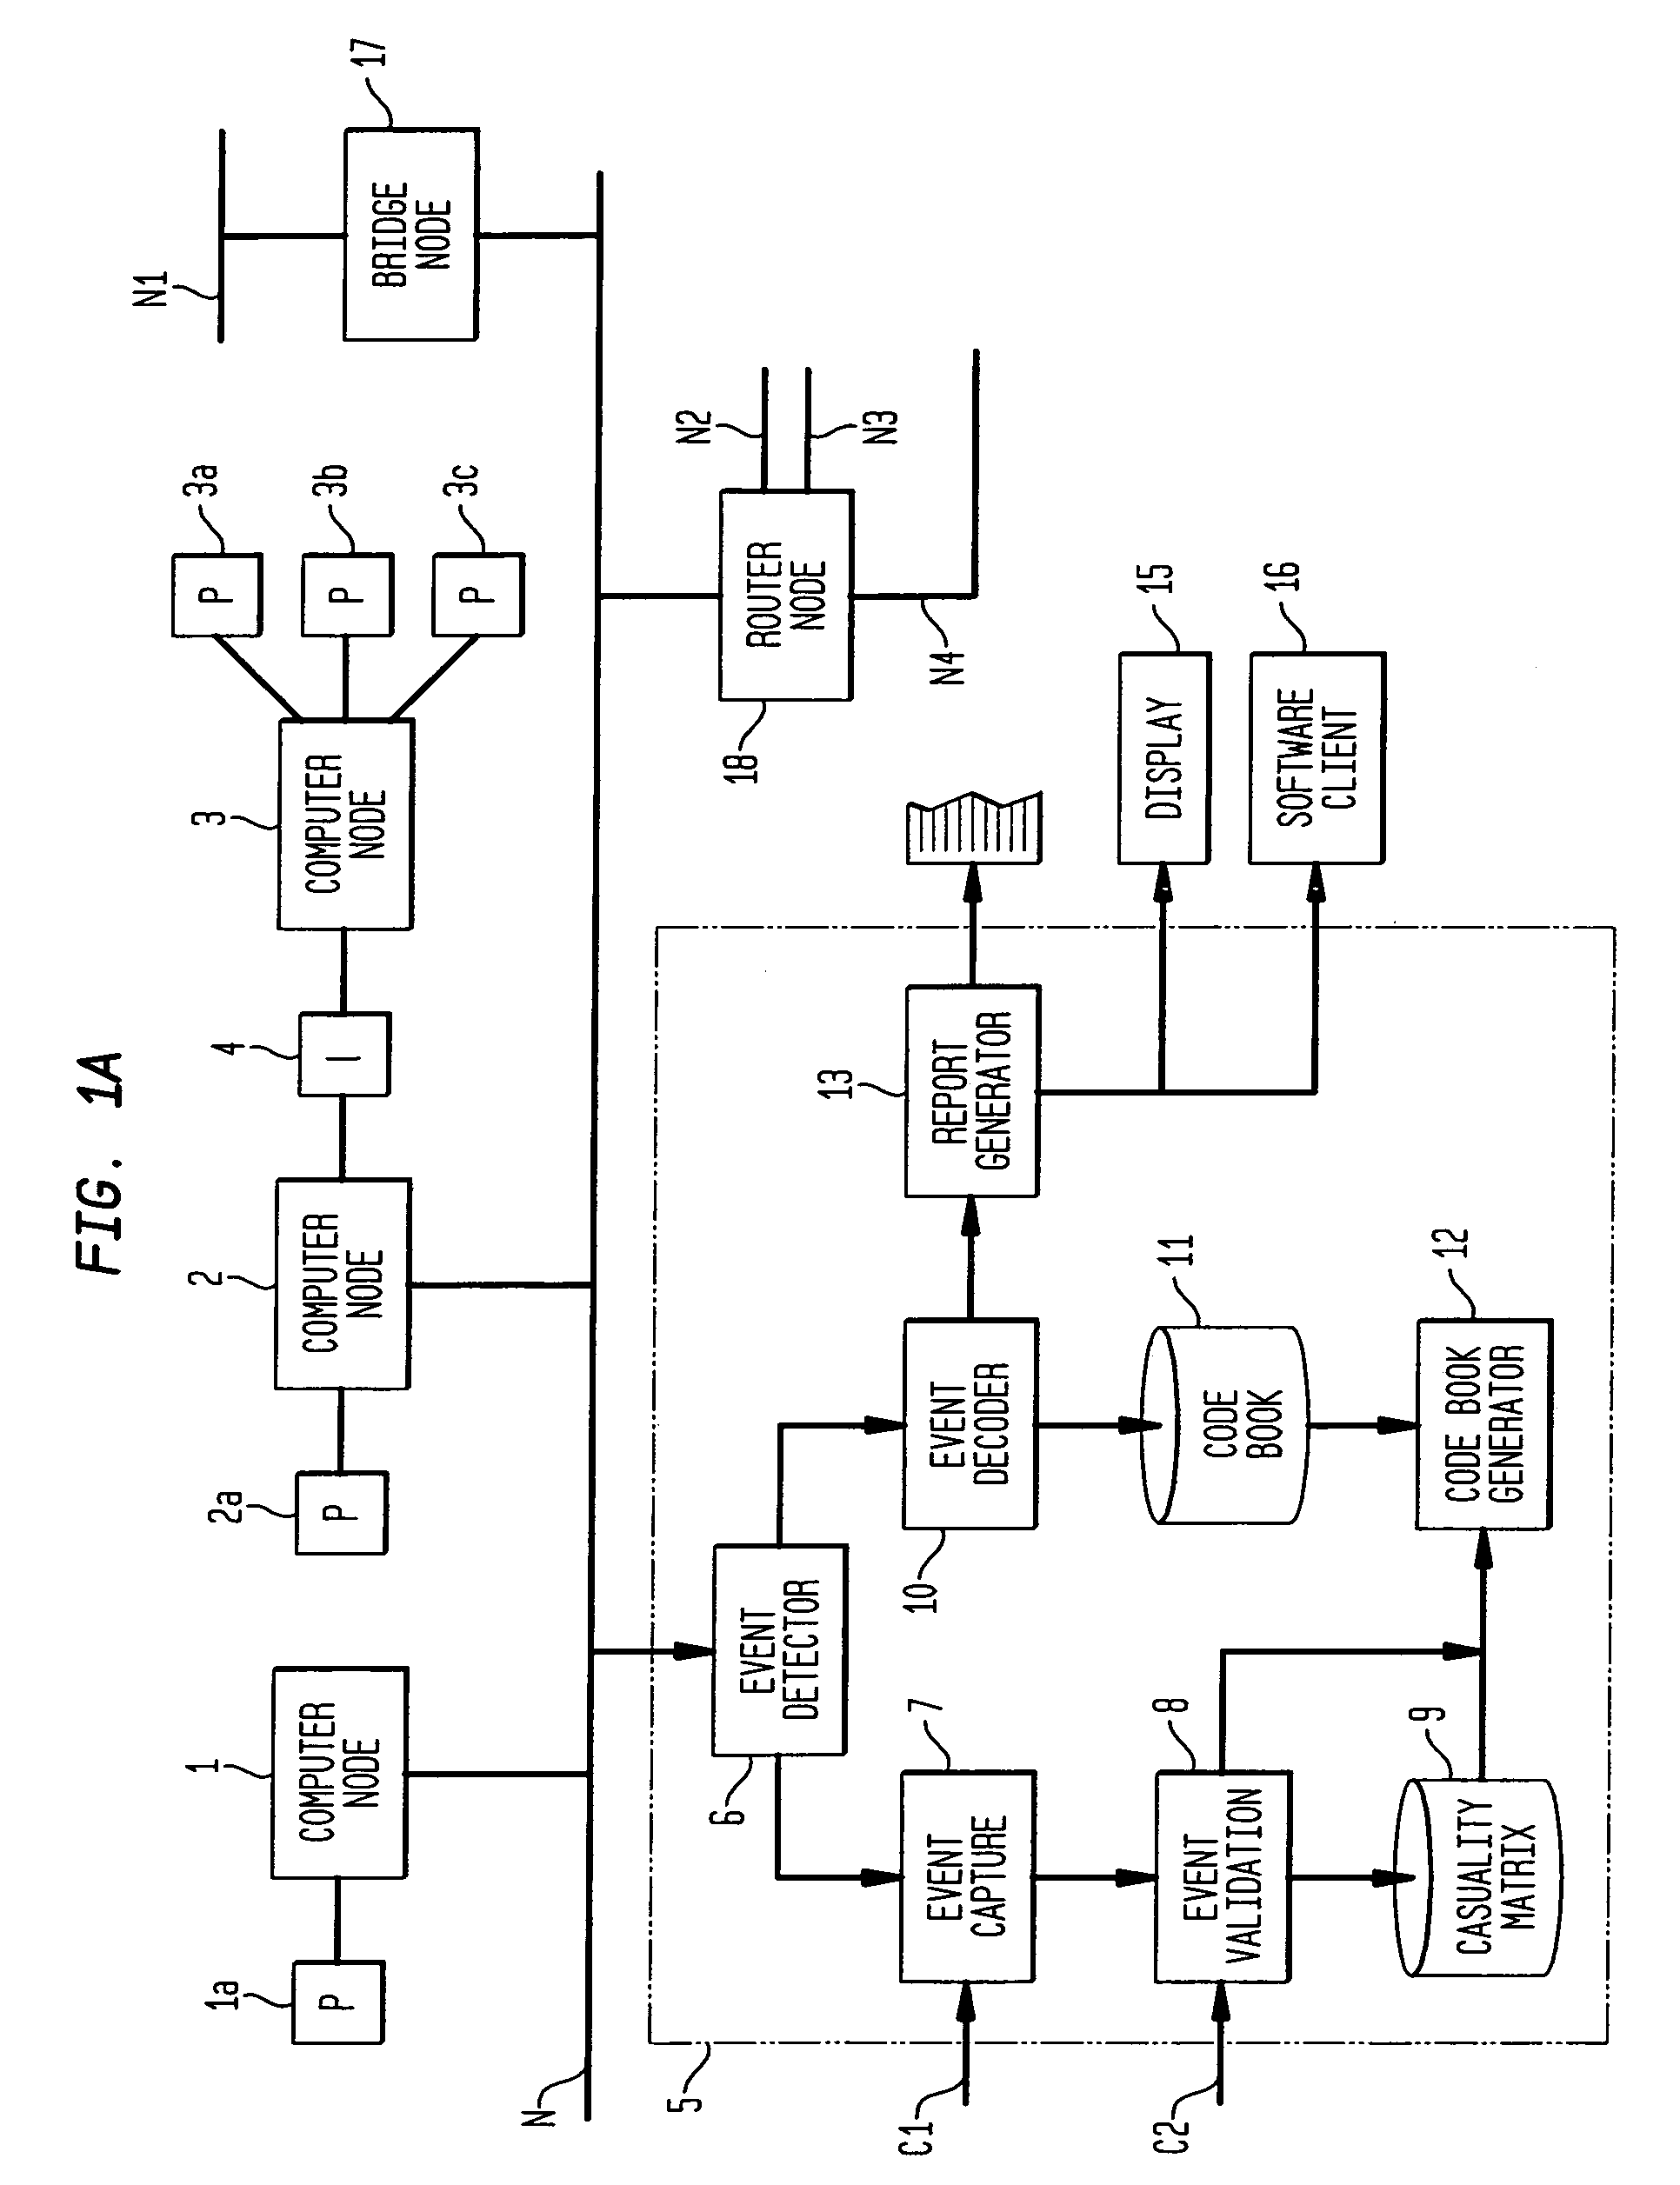 Apparatus and method for event correlation and problem reporting